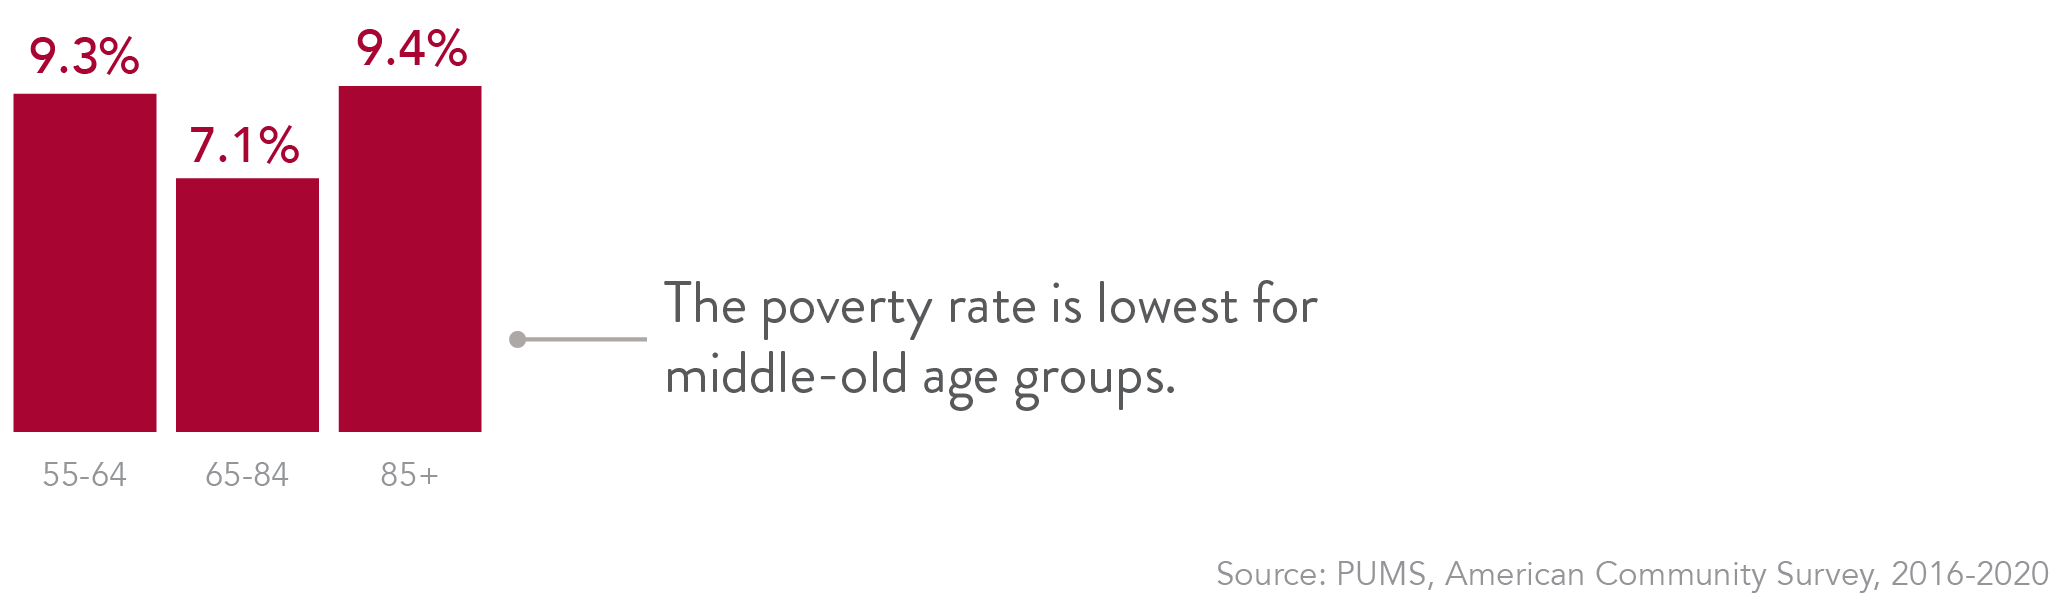 The poverty rate is lowest for middle-old age groups.